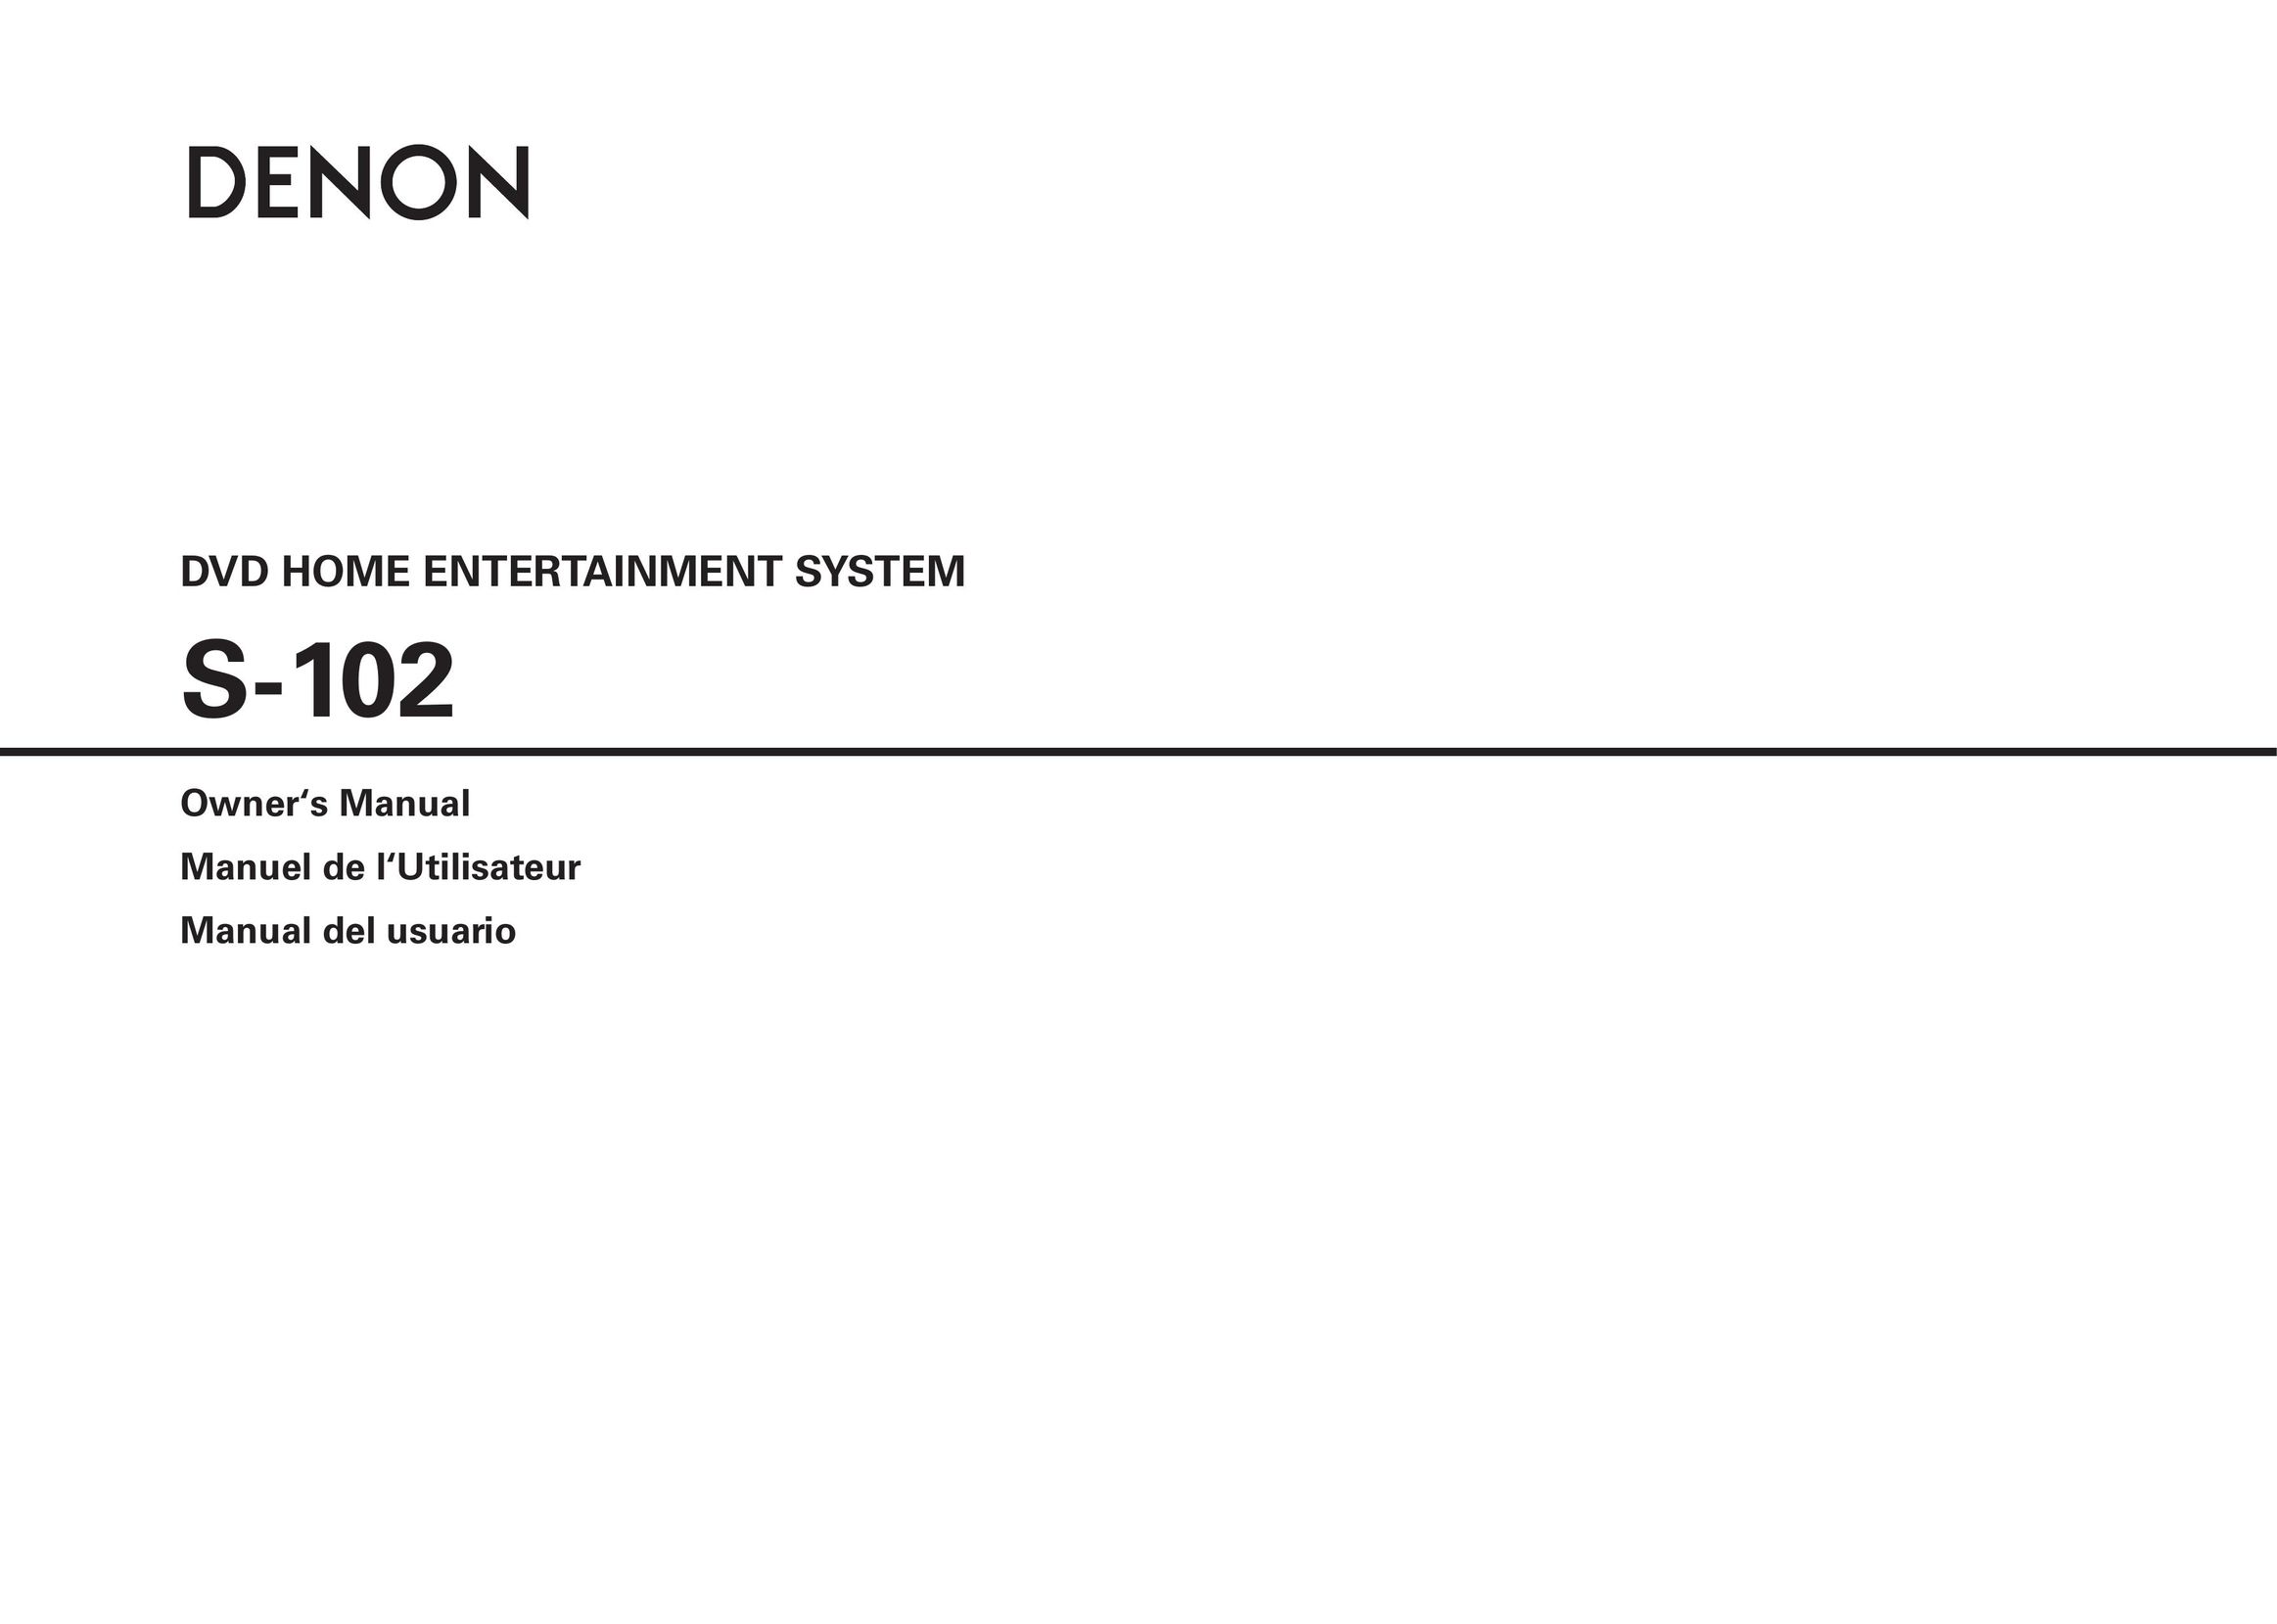 Denon S-102 Home Theater System User Manual